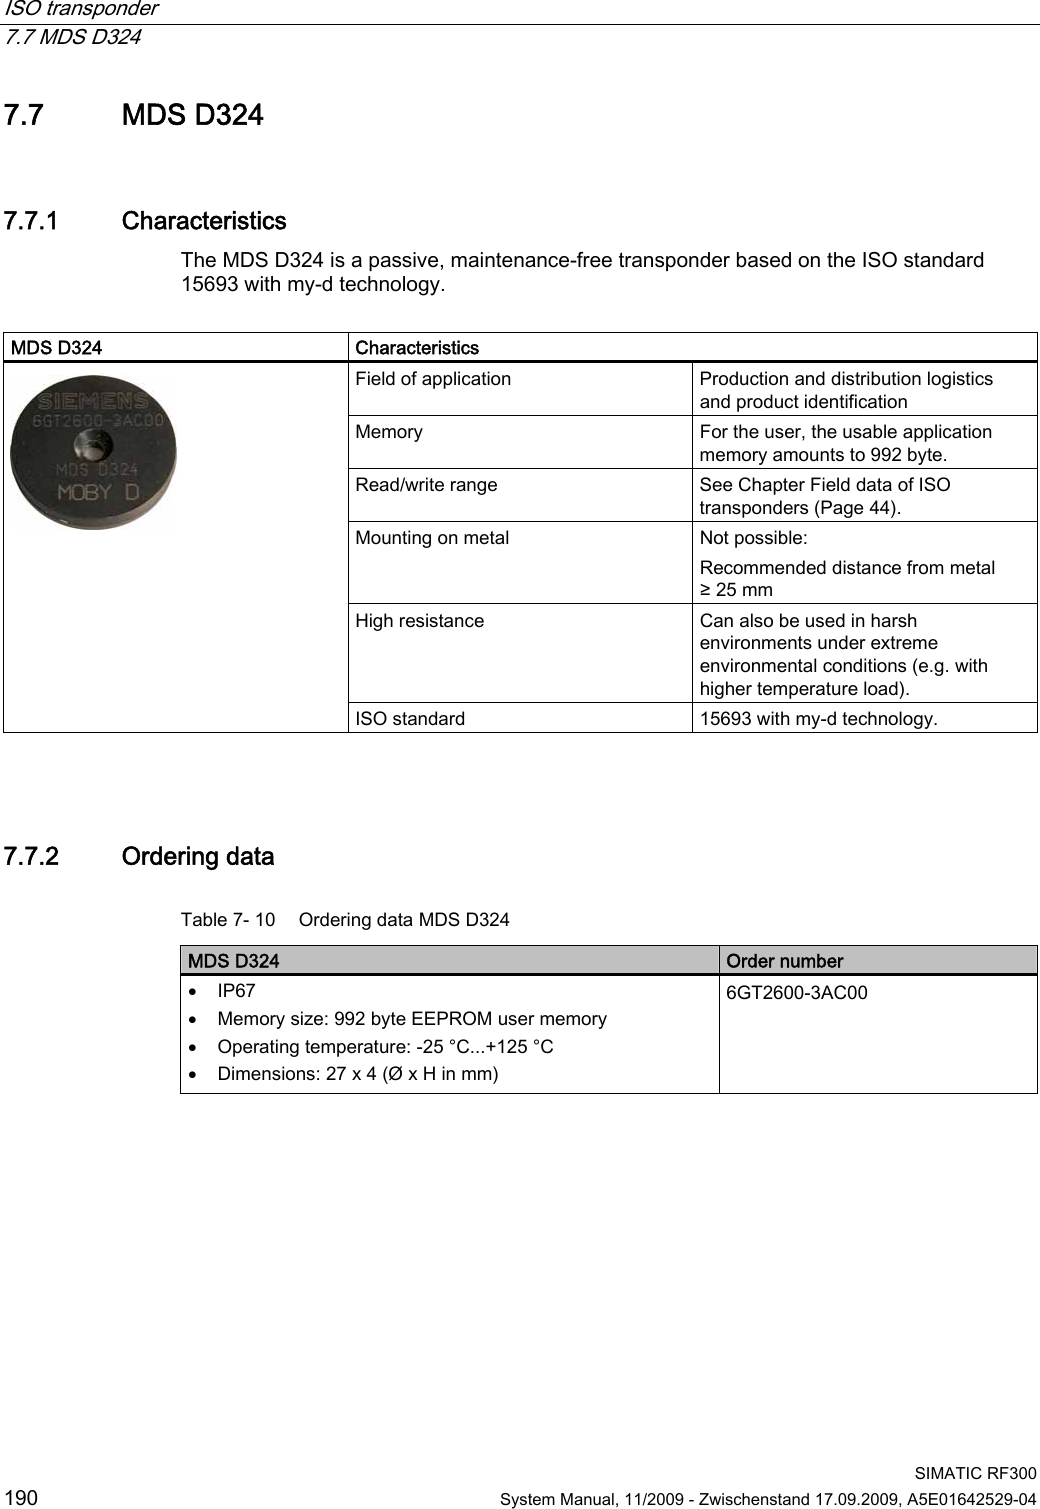 ISO transponder   7.7 MDS D324  SIMATIC RF300 190  System Manual, 11/2009 - Zwischenstand 17.09.2009, A5E01642529-04 7.7 MDS D324 7.7.1 Characteristics The MDS D324 is a passive, maintenance-free transponder based on the ISO standard 15693 with my-d technology.  MDS D324  Characteristics Field of application  Production and distribution logistics and product identification Memory  For the user, the usable application memory amounts to 992 byte. Read/write range  See Chapter Field data of ISO transponders (Page 44). Mounting on metal  Not possible:  Recommended distance from metal ≥ 25 mm High resistance  Can also be used in harsh environments under extreme environmental conditions (e.g. with higher temperature load).  ISO standard  15693 with my-d technology.  7.7.2 Ordering data Table 7- 10  Ordering data MDS D324 MDS D324  Order number  IP67  Memory size: 992 byte EEPROM user memory  Operating temperature: -25 °C...+125 °C  Dimensions: 27 x 4 (Ø x H in mm) 6GT2600-3AC00 